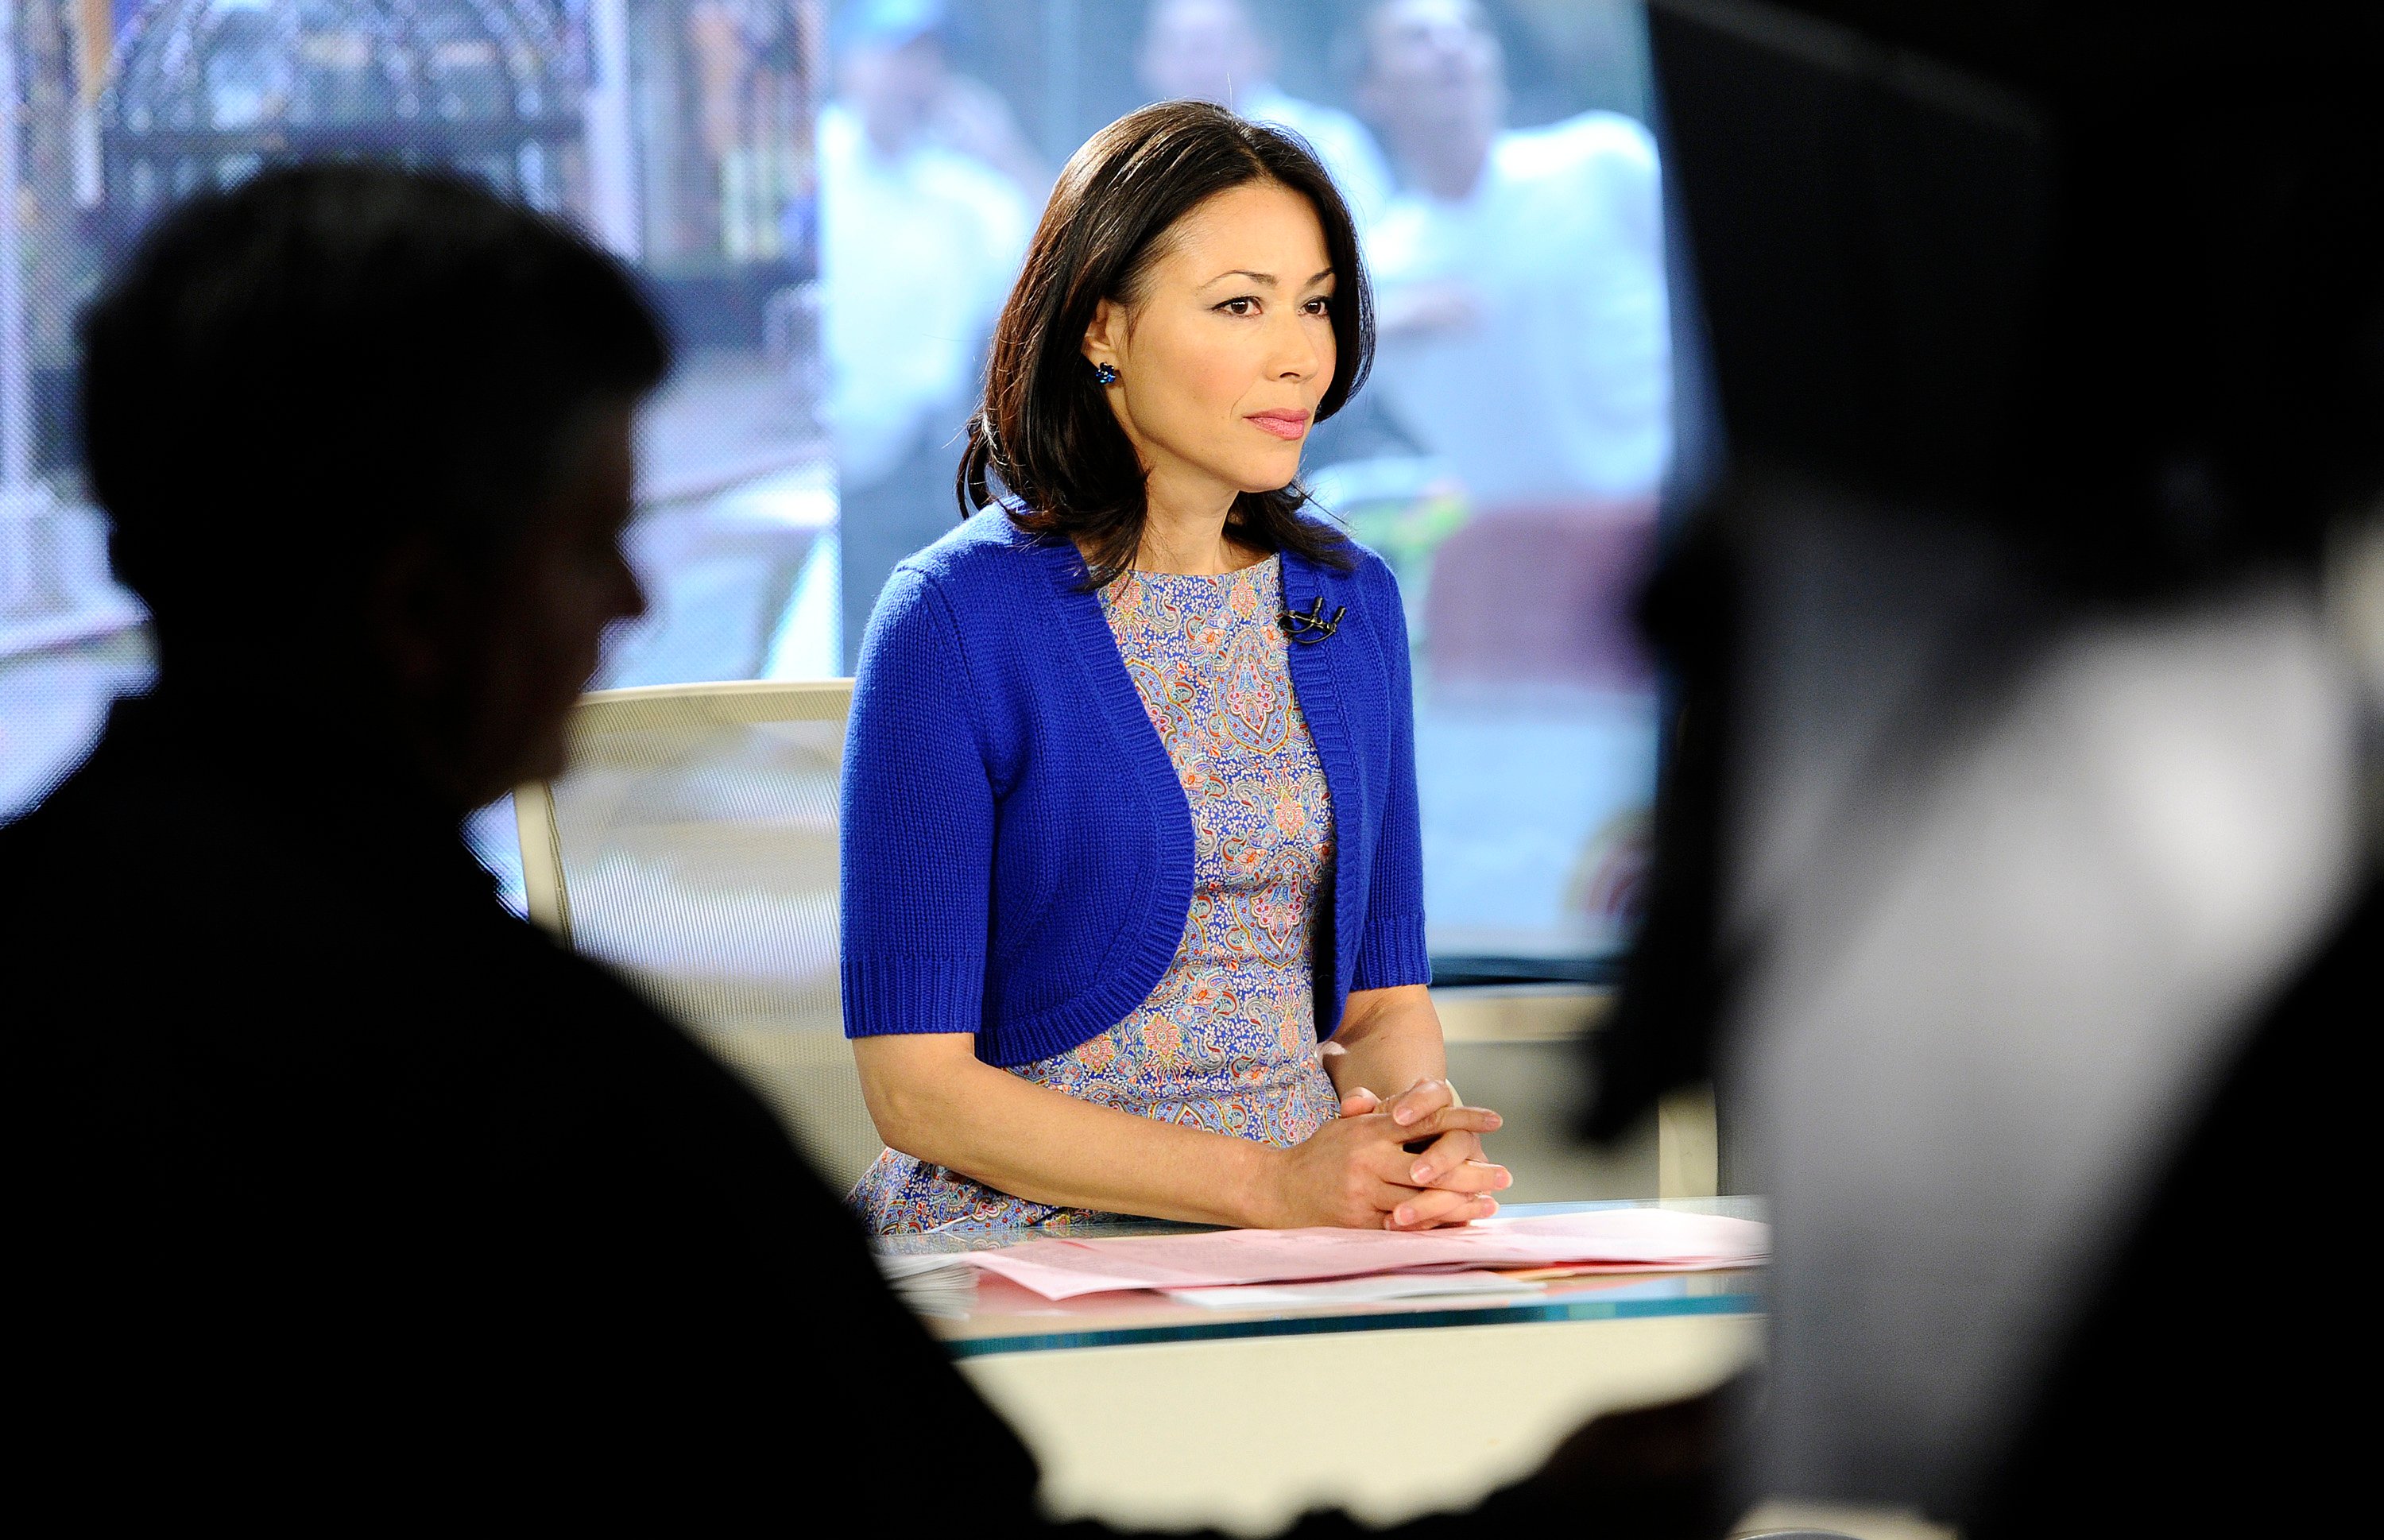 ‘Today’: Ann Curry Opened Up About Her ‘Lack of Chemistry’ With Matt Lauer – ‘Chemistry Takes Two’